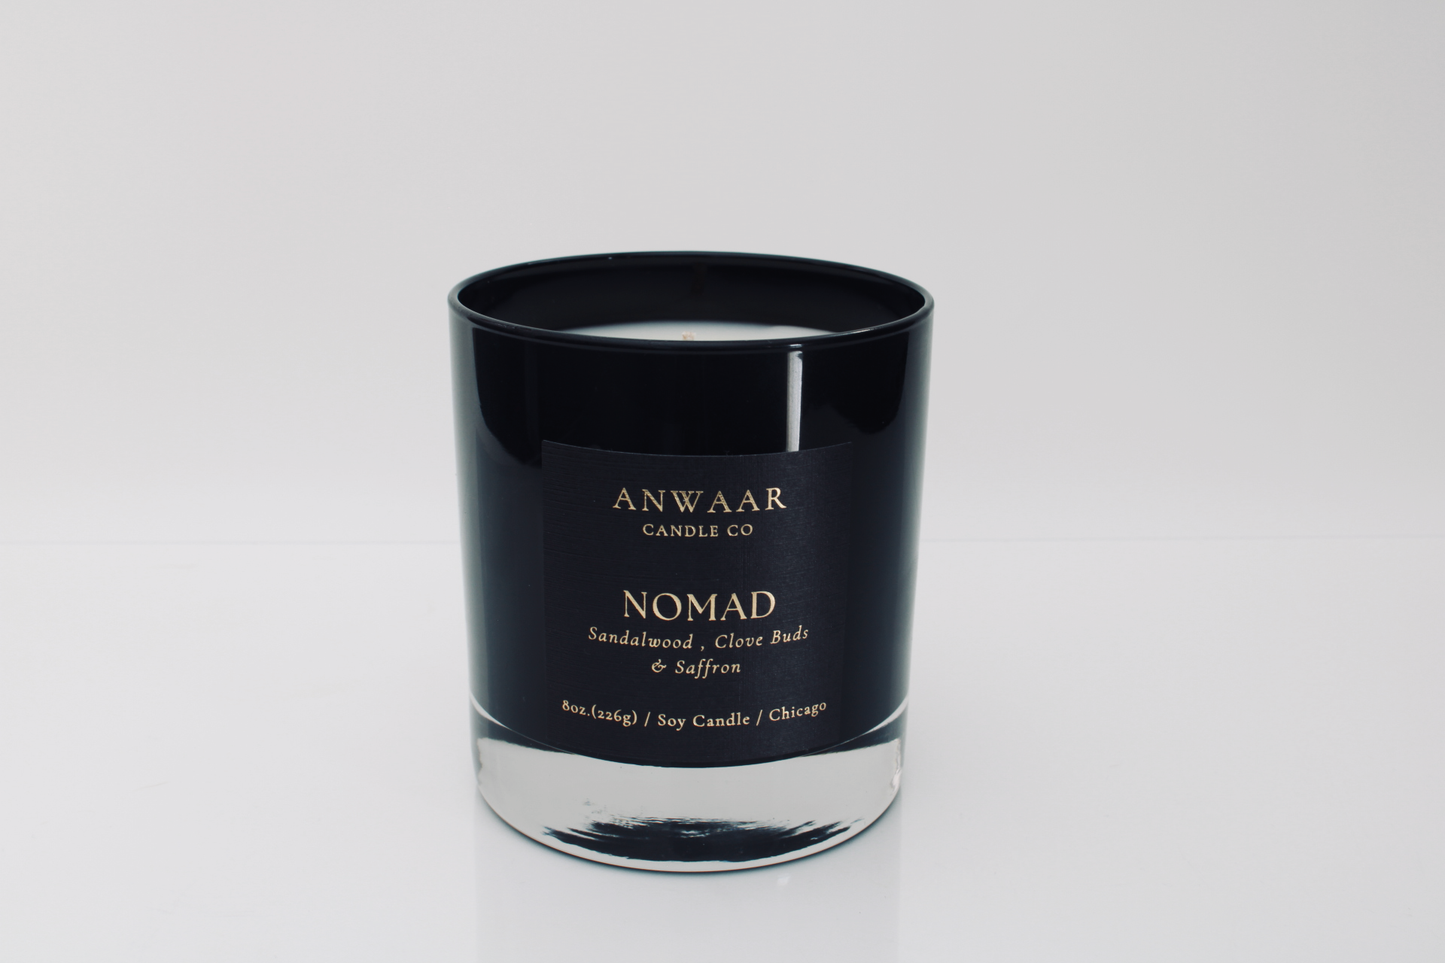 Nomad - black elegant candle vessel with black label and gold letters with details about the product  